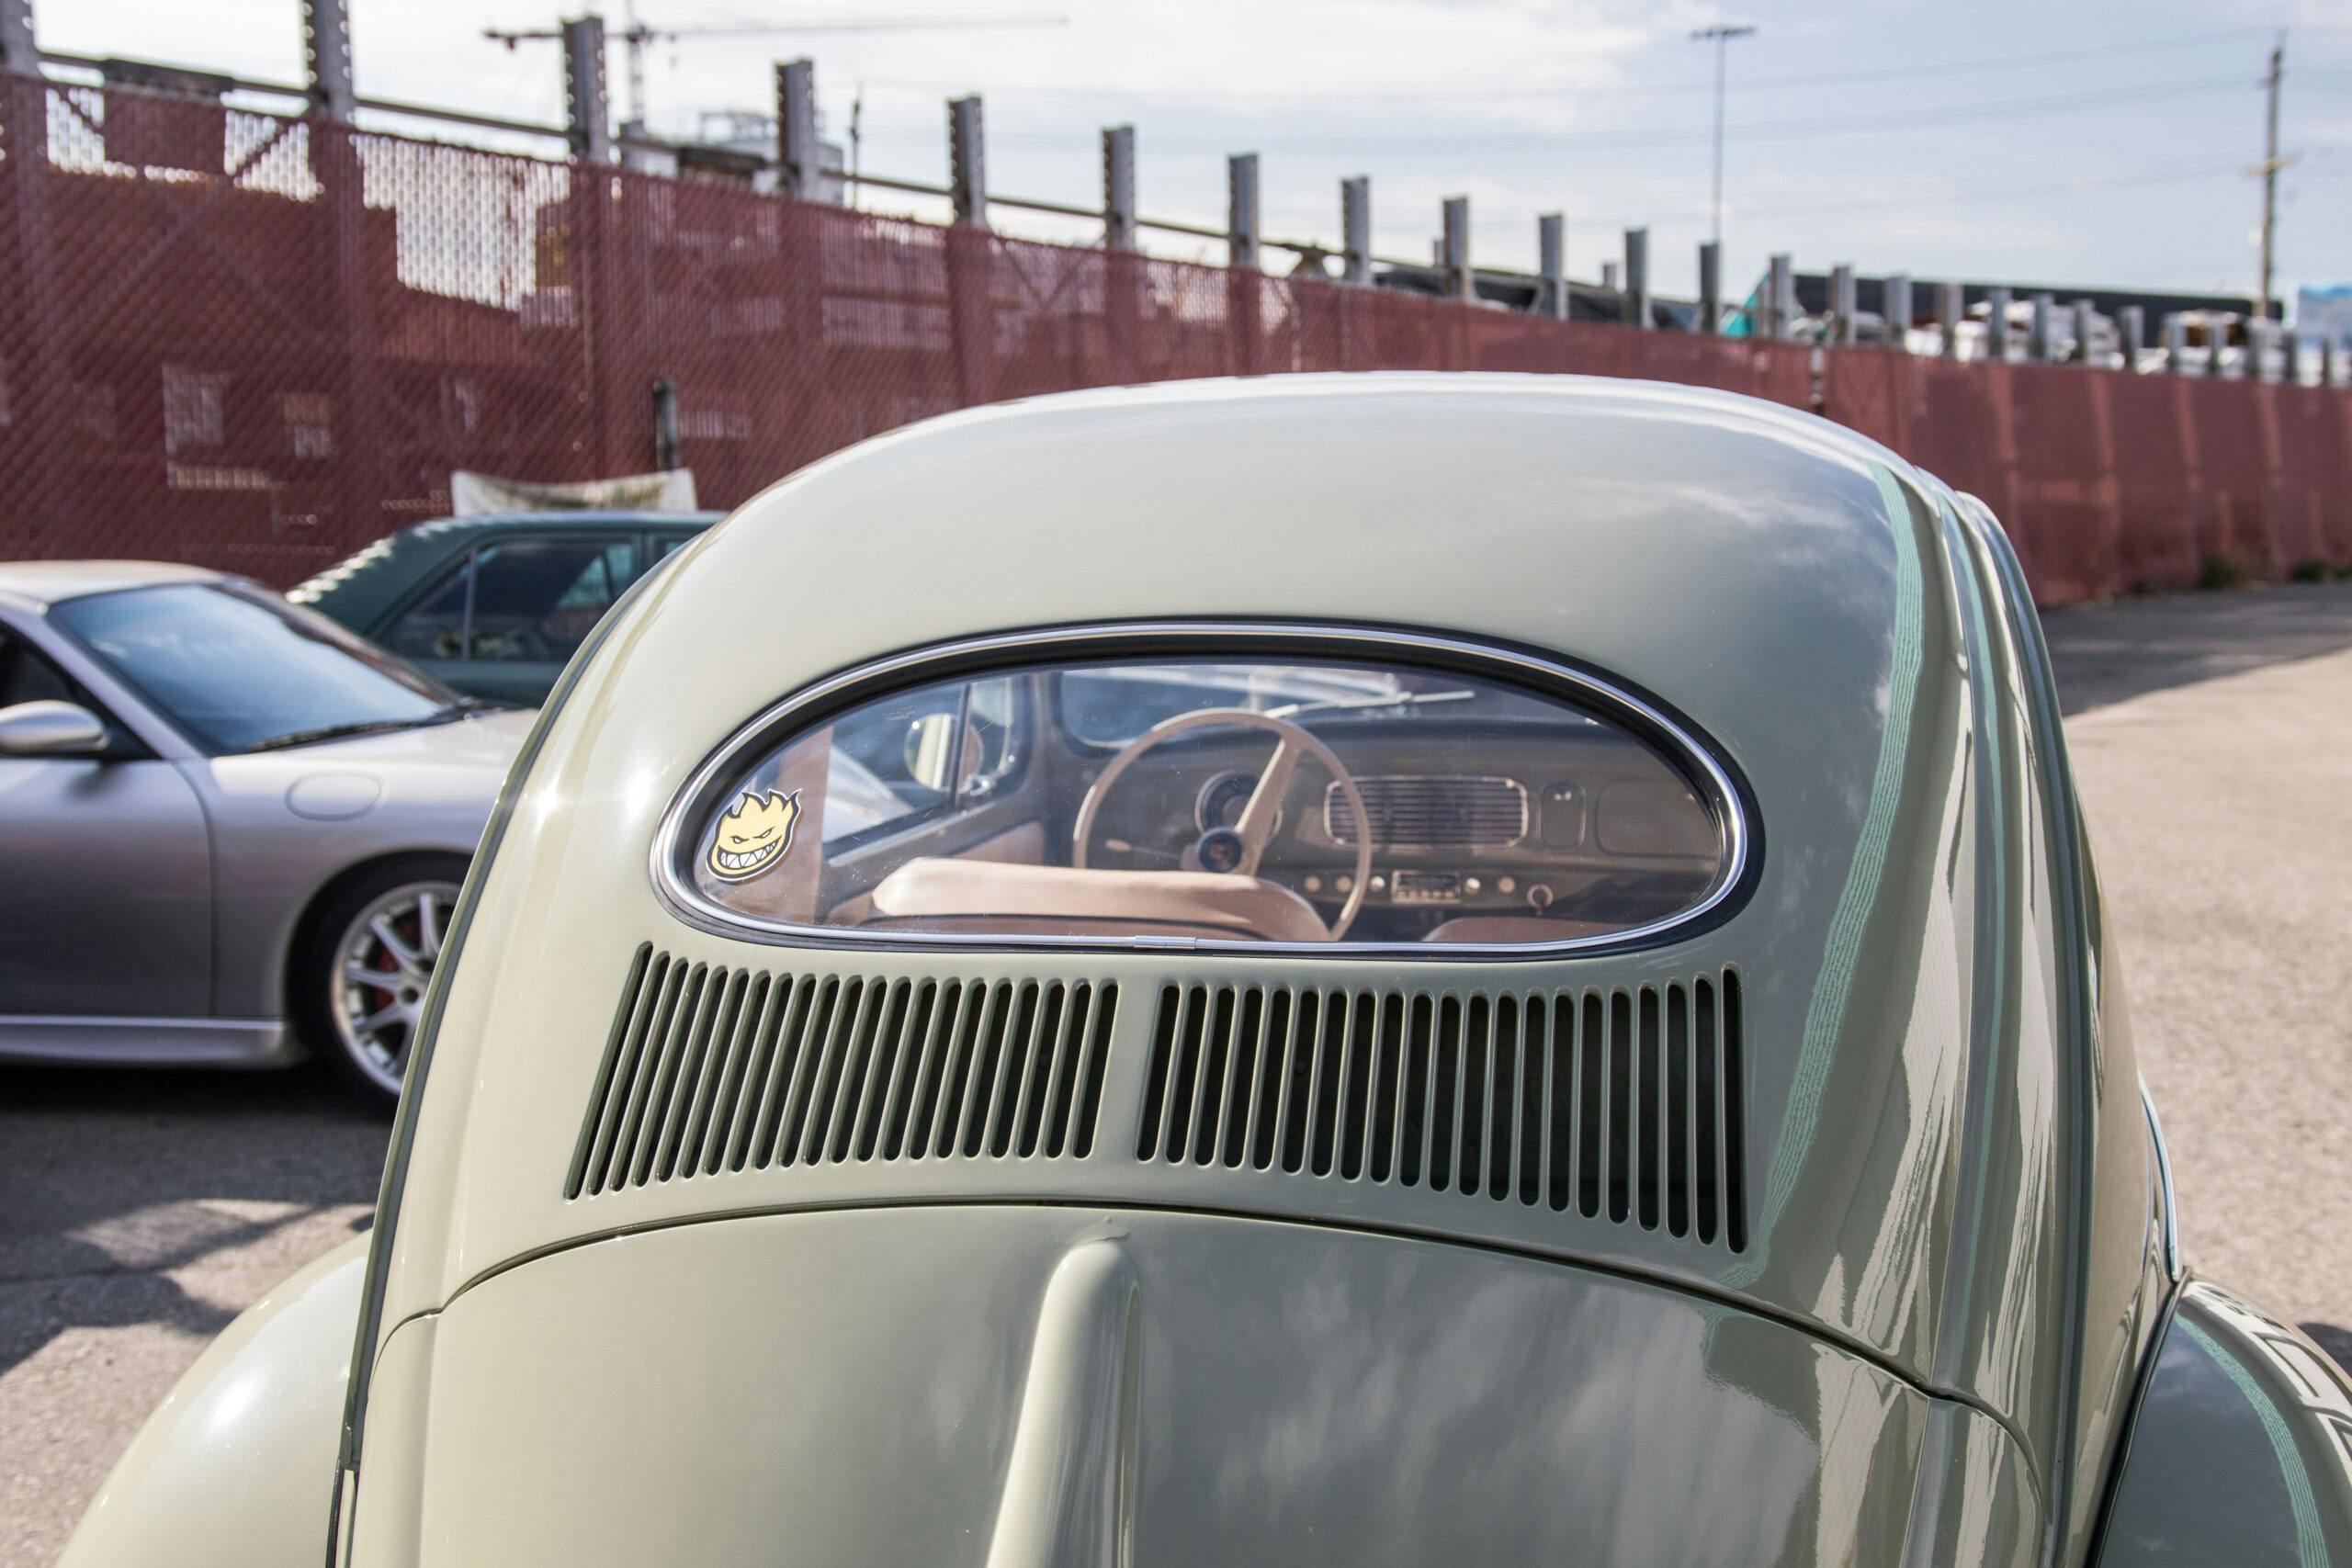 Volkswagen New Beetle squashed but not forgotten - Hagerty Media